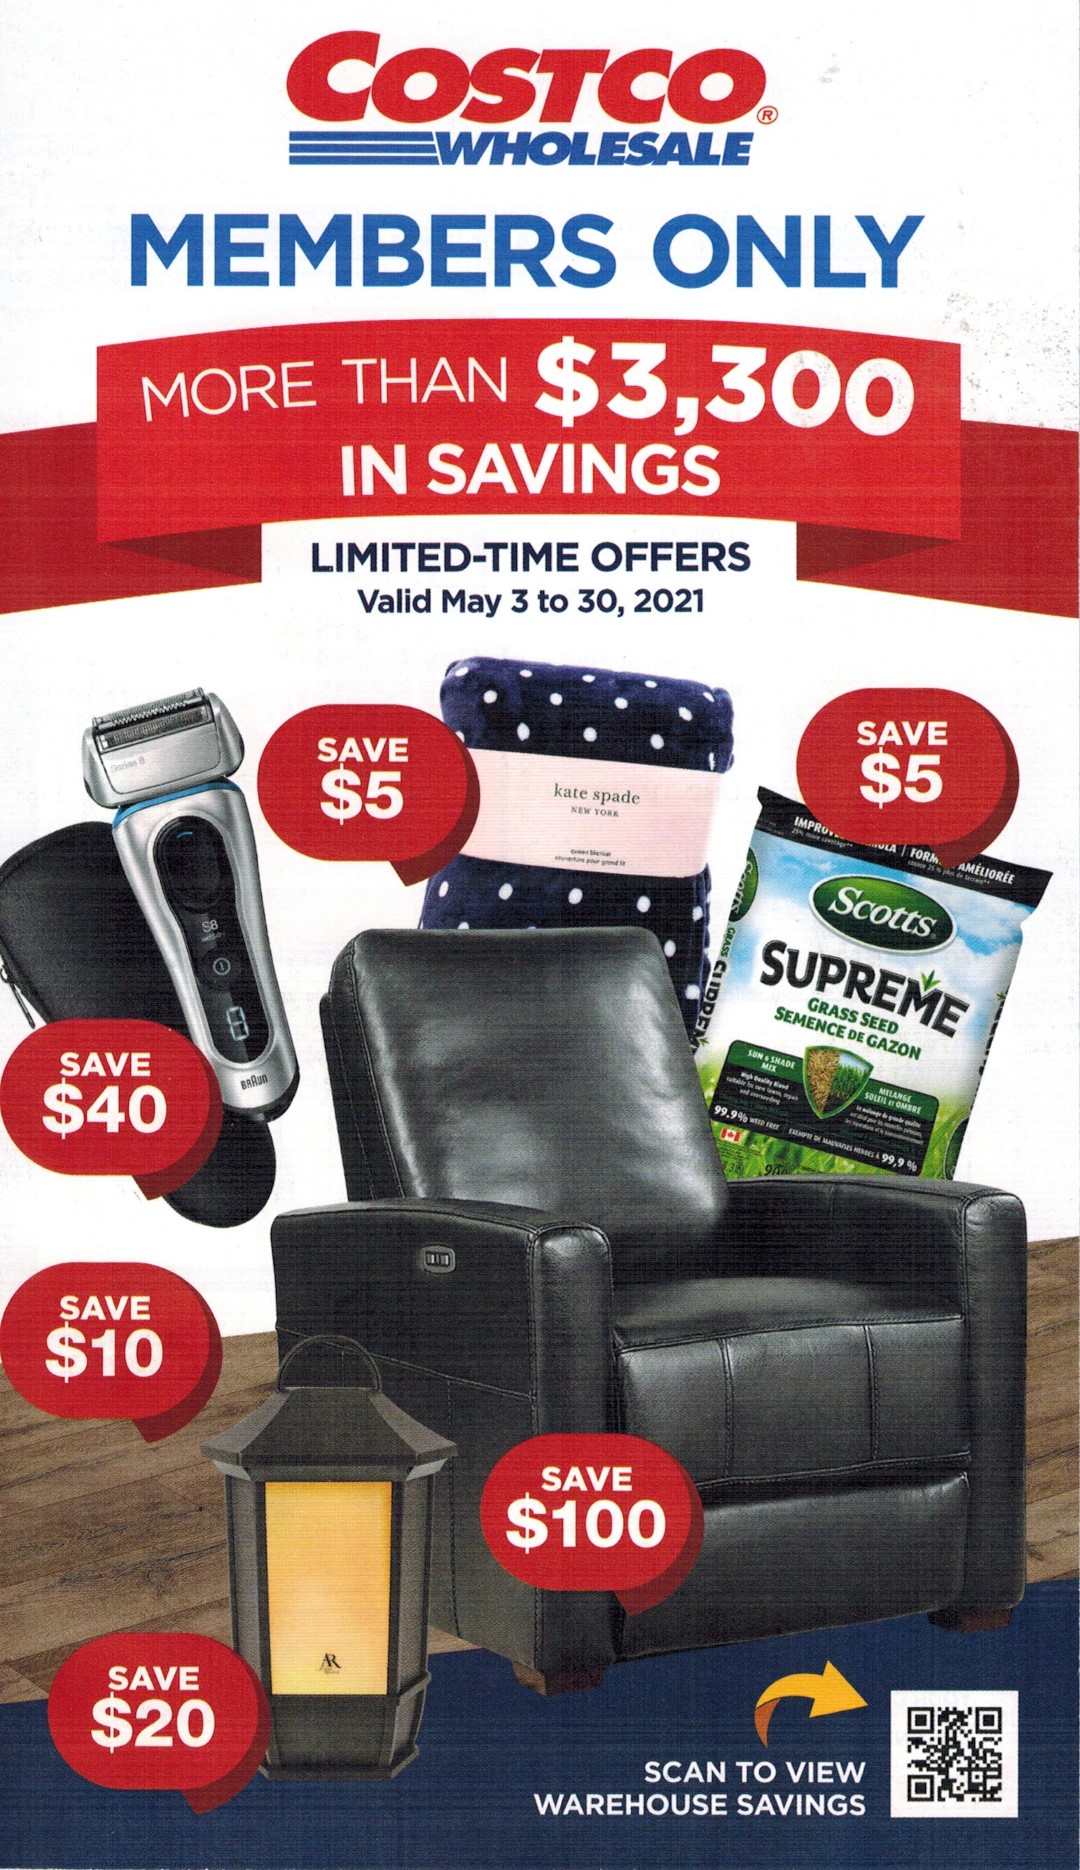 Costco Canada Flyer Preview May 3rd - 30th 2021